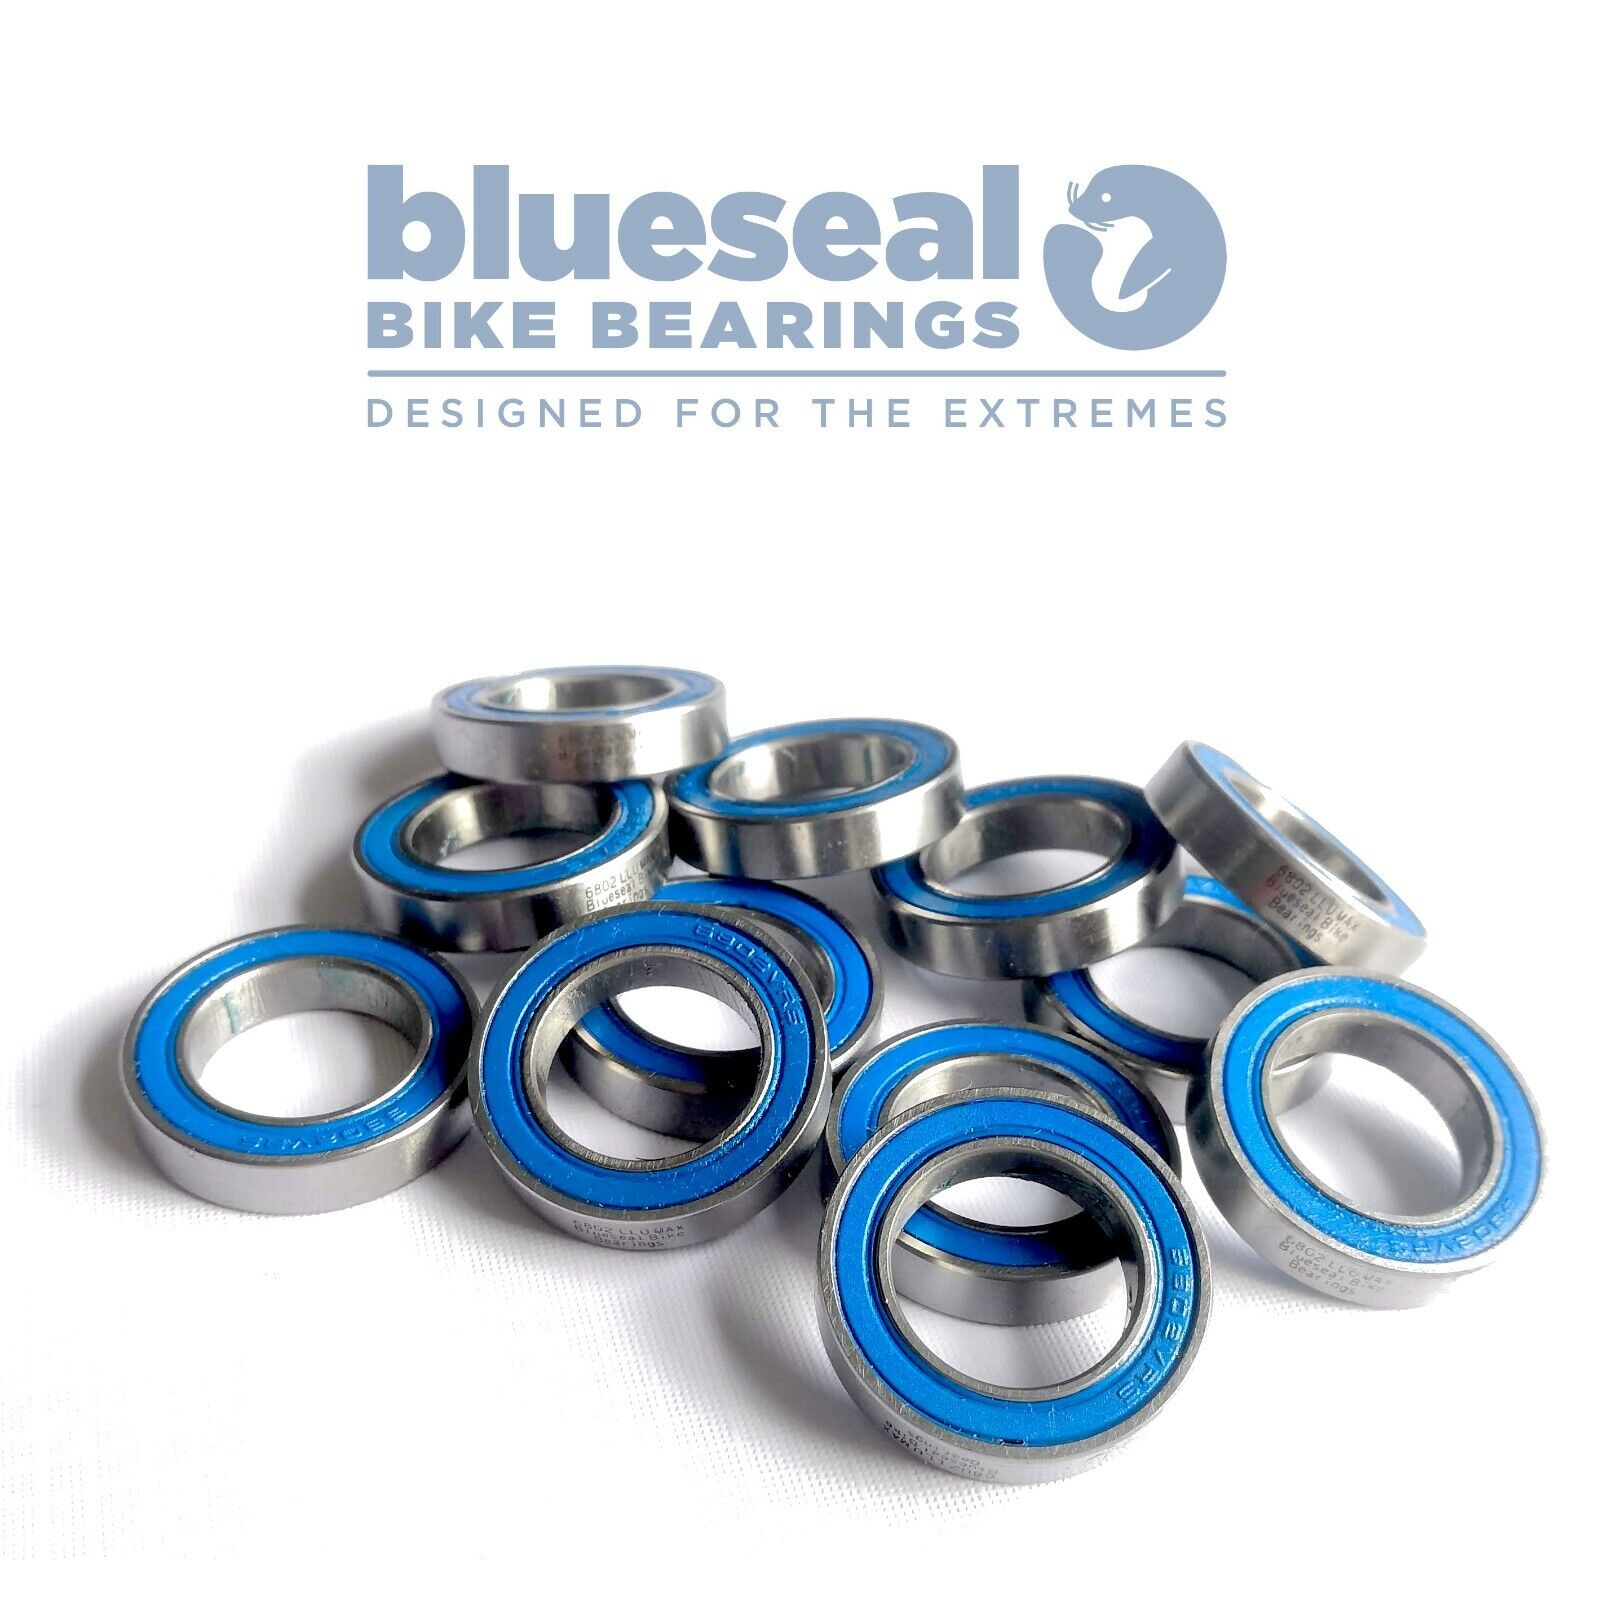 Specialized Status FSR Bearing Kit Years - Fra 2010 MTB 2015 Credence Ranking integrated 1st place